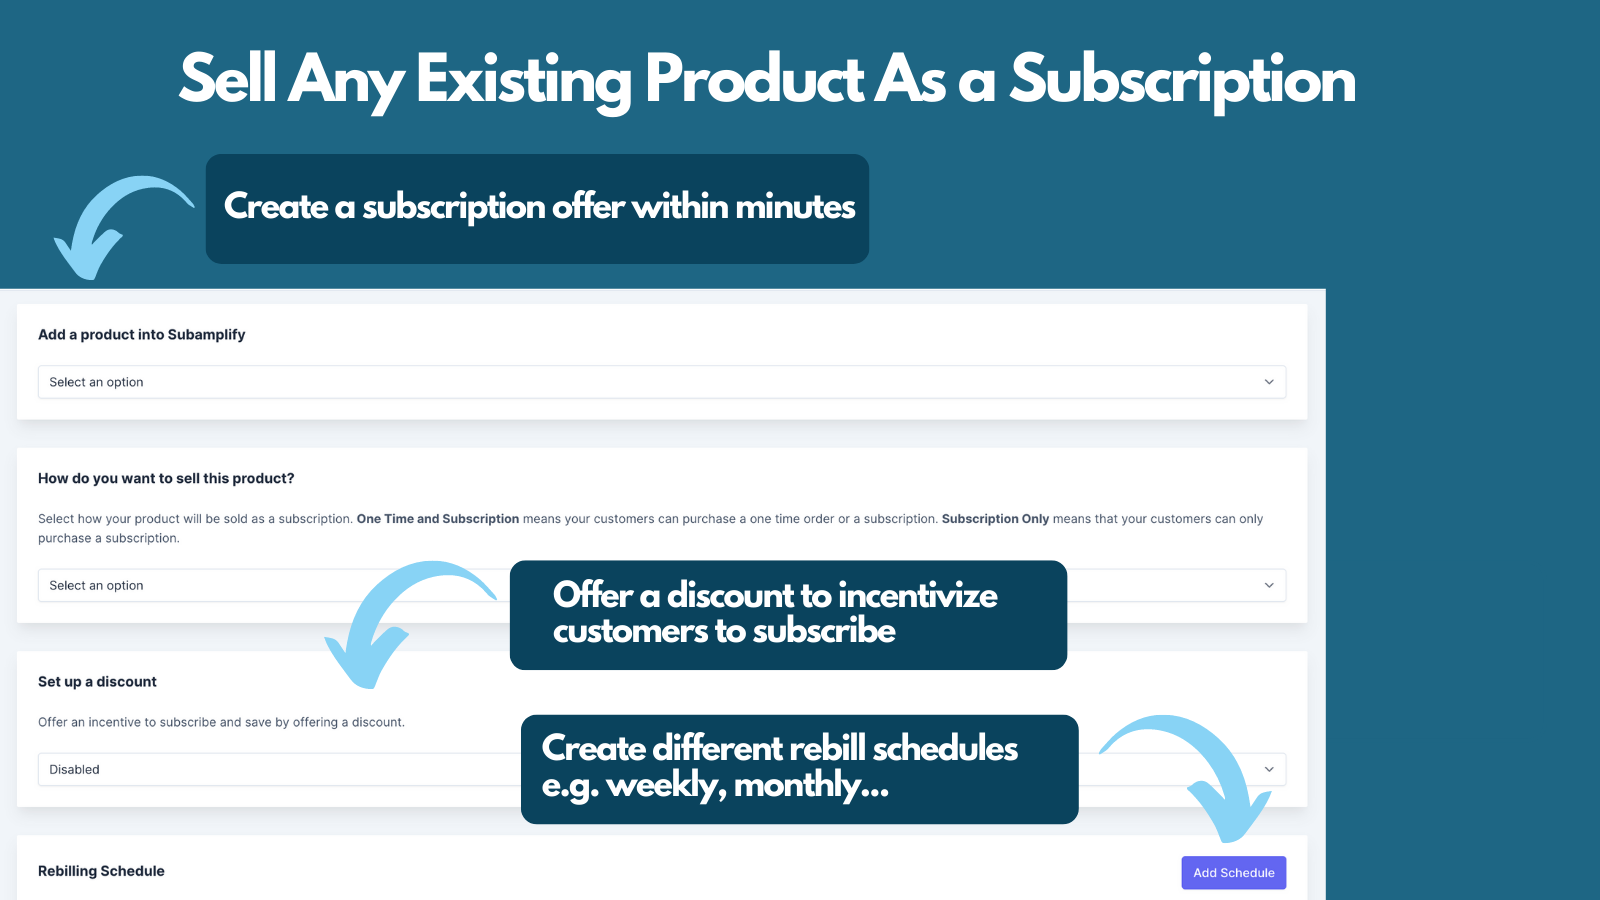 Sell any existing product as a subscription